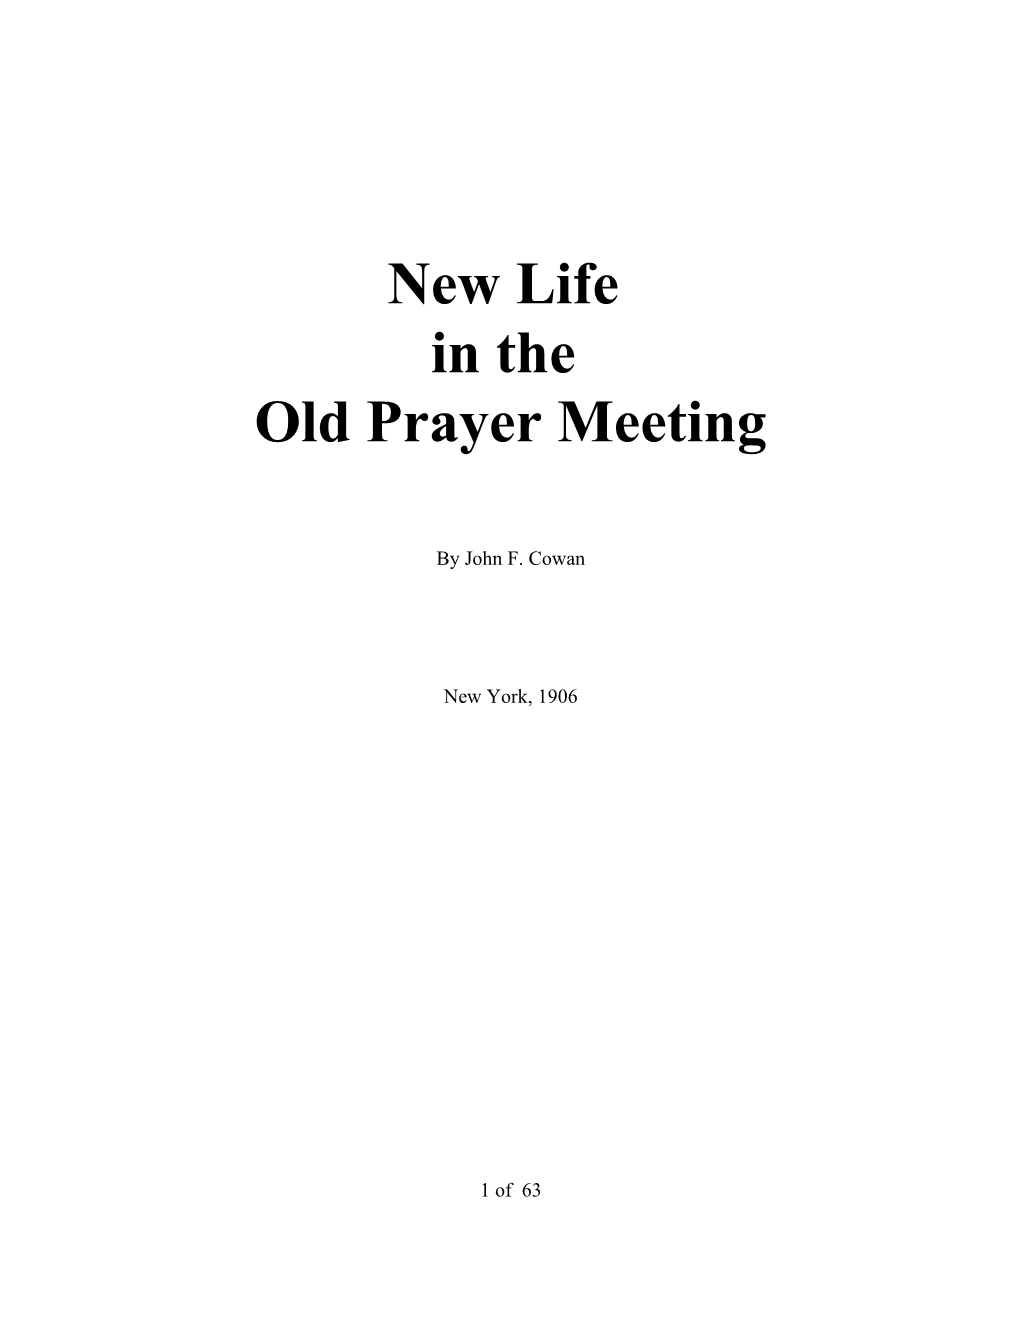 New Life in the Old Prayer Meeting